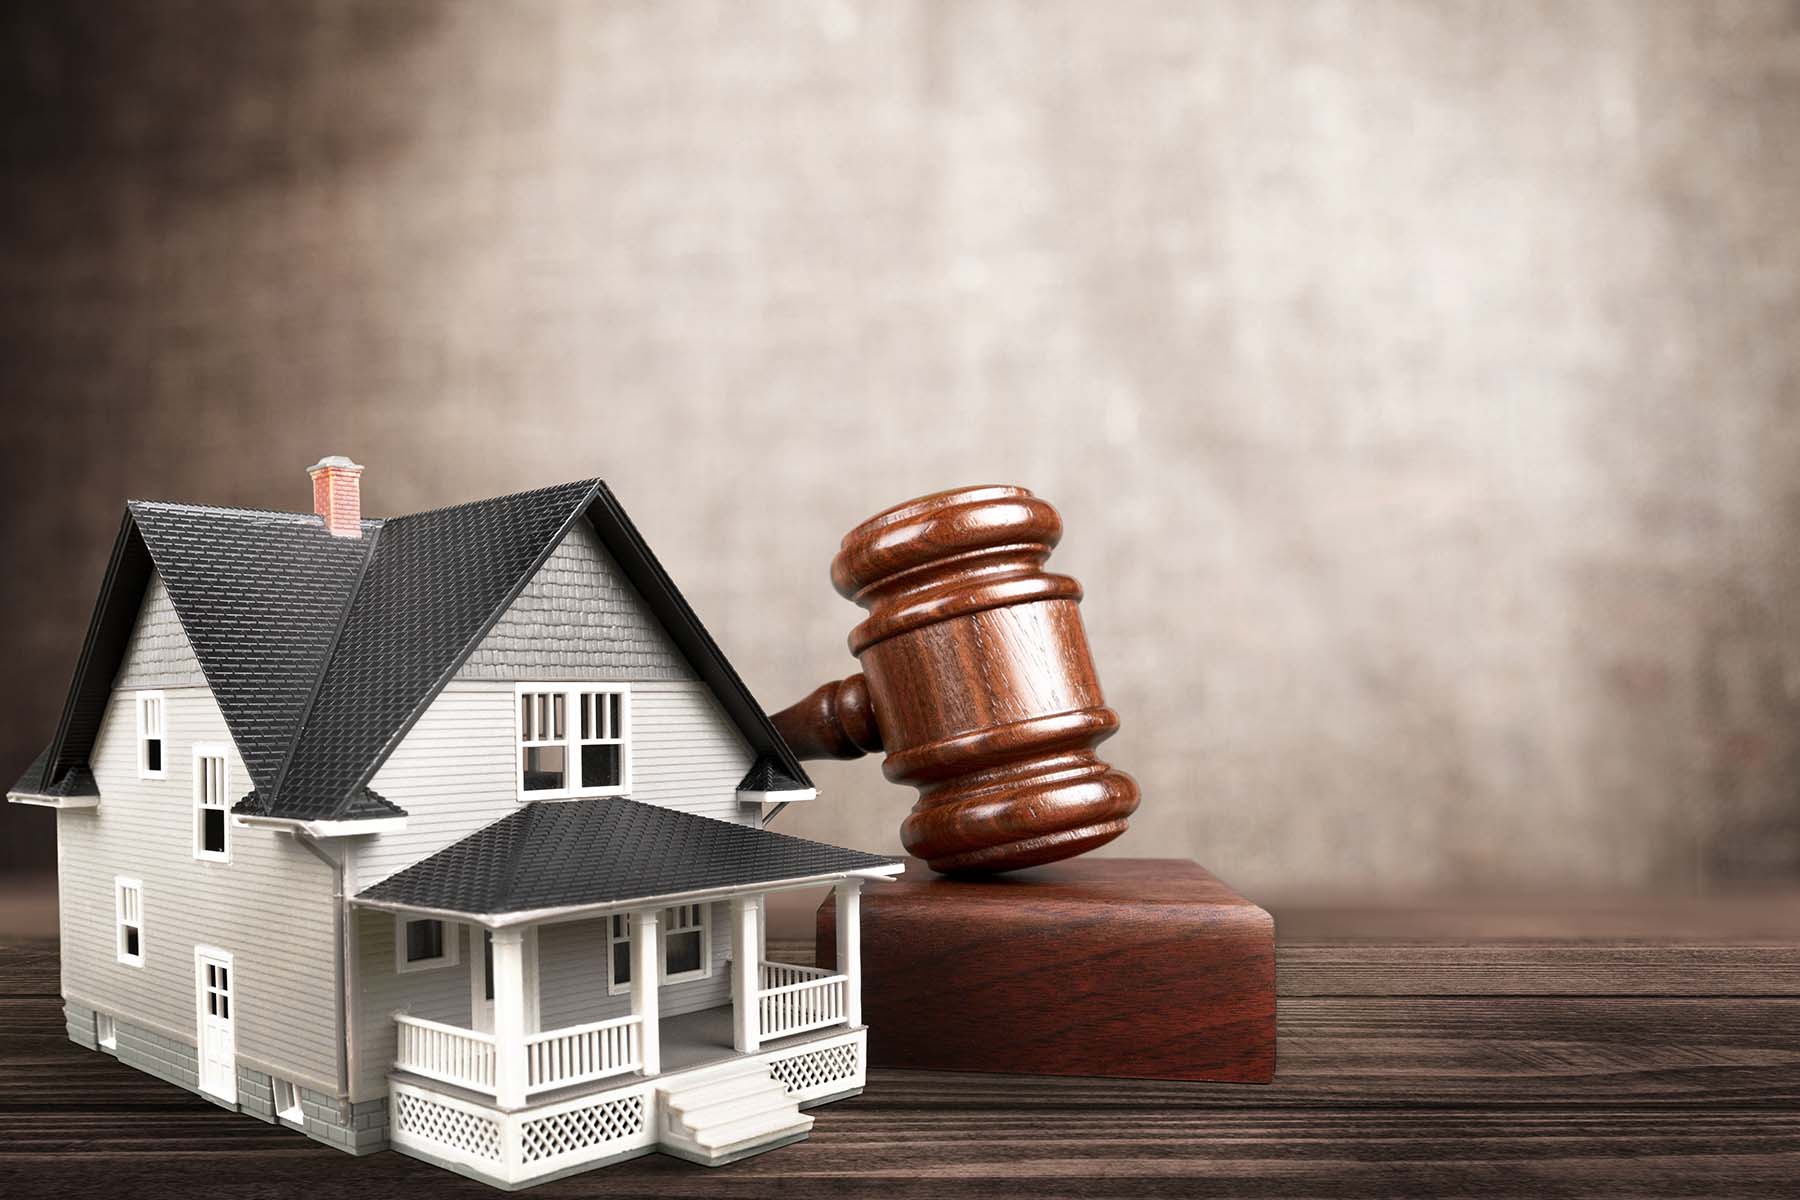 Miniature house and gavel representing real estate law